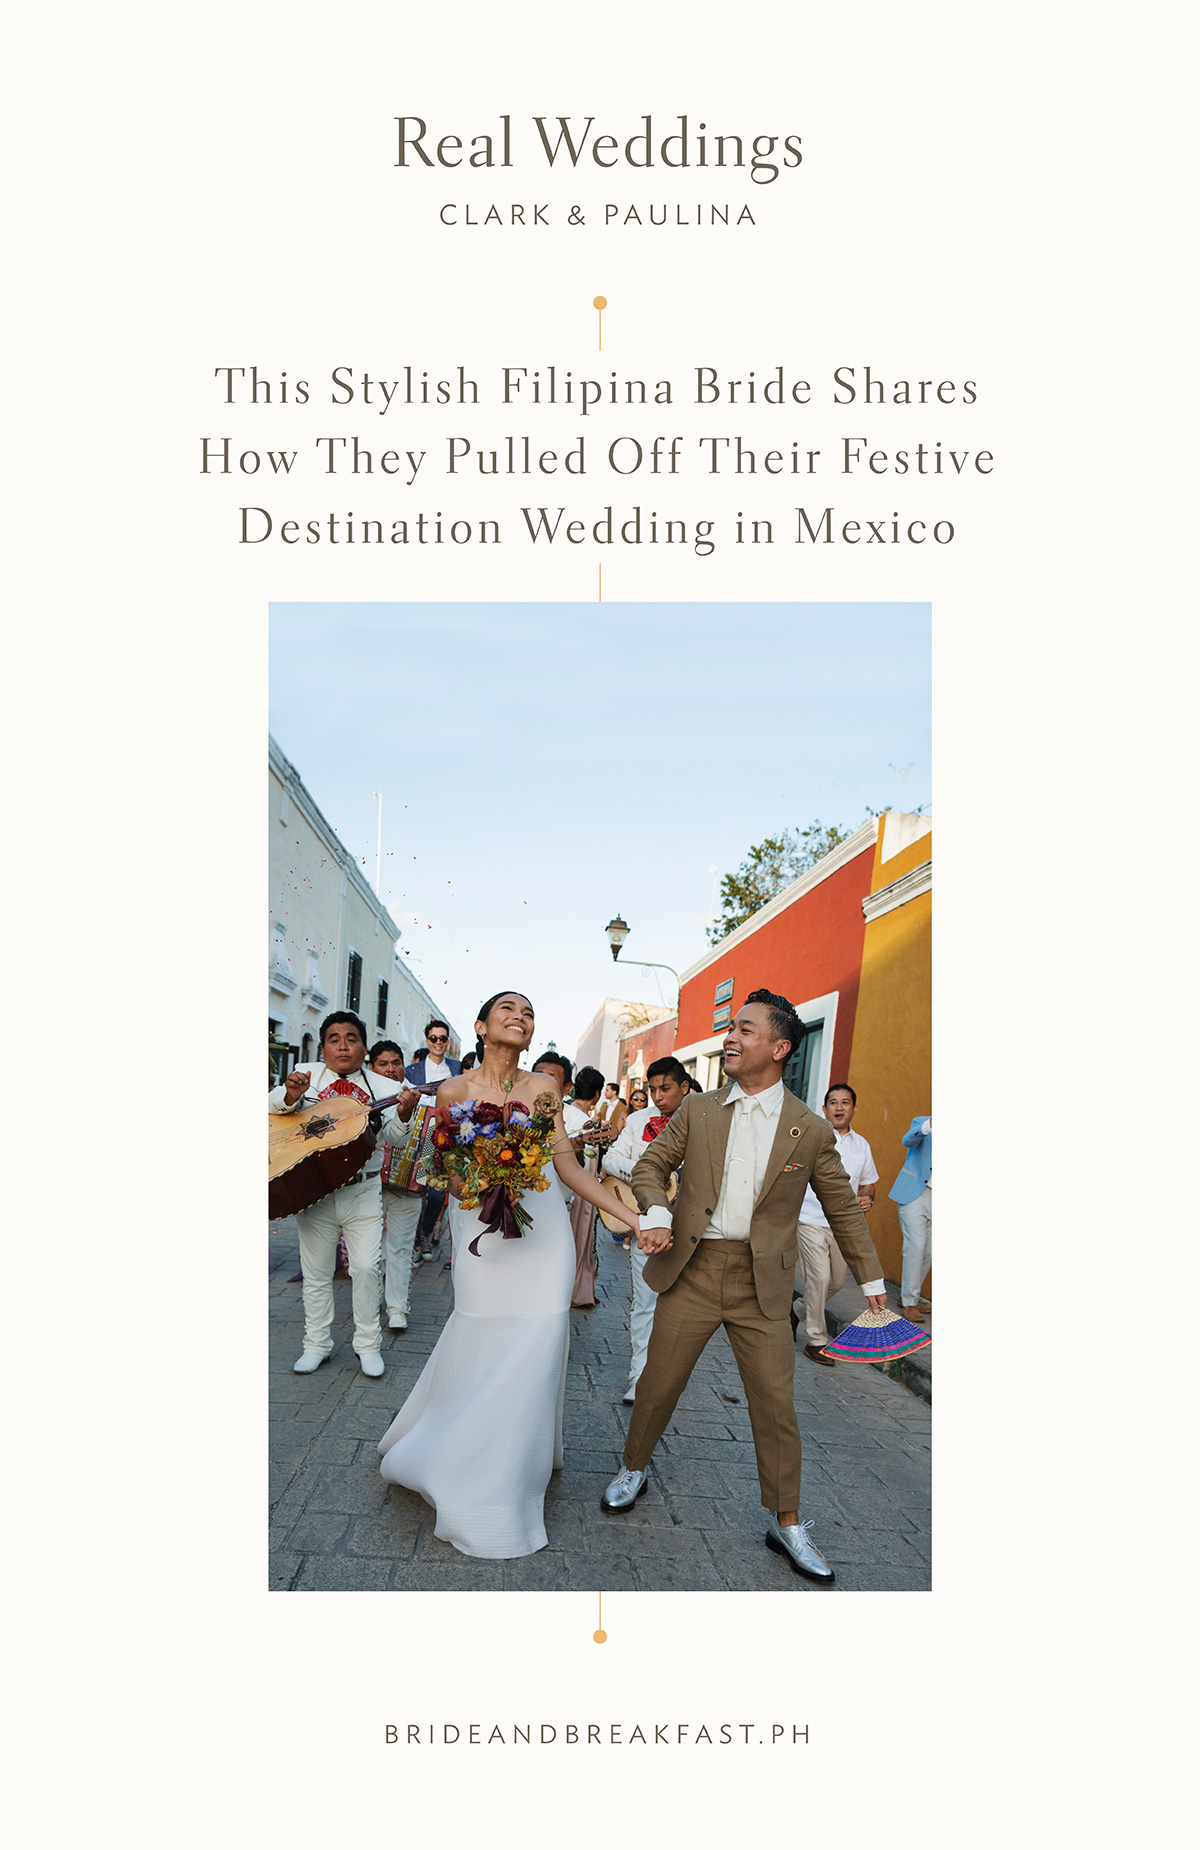 This Stylish Filipina Bride Shares How They Pulled Off Their Festive Destination Wedding in Mexico